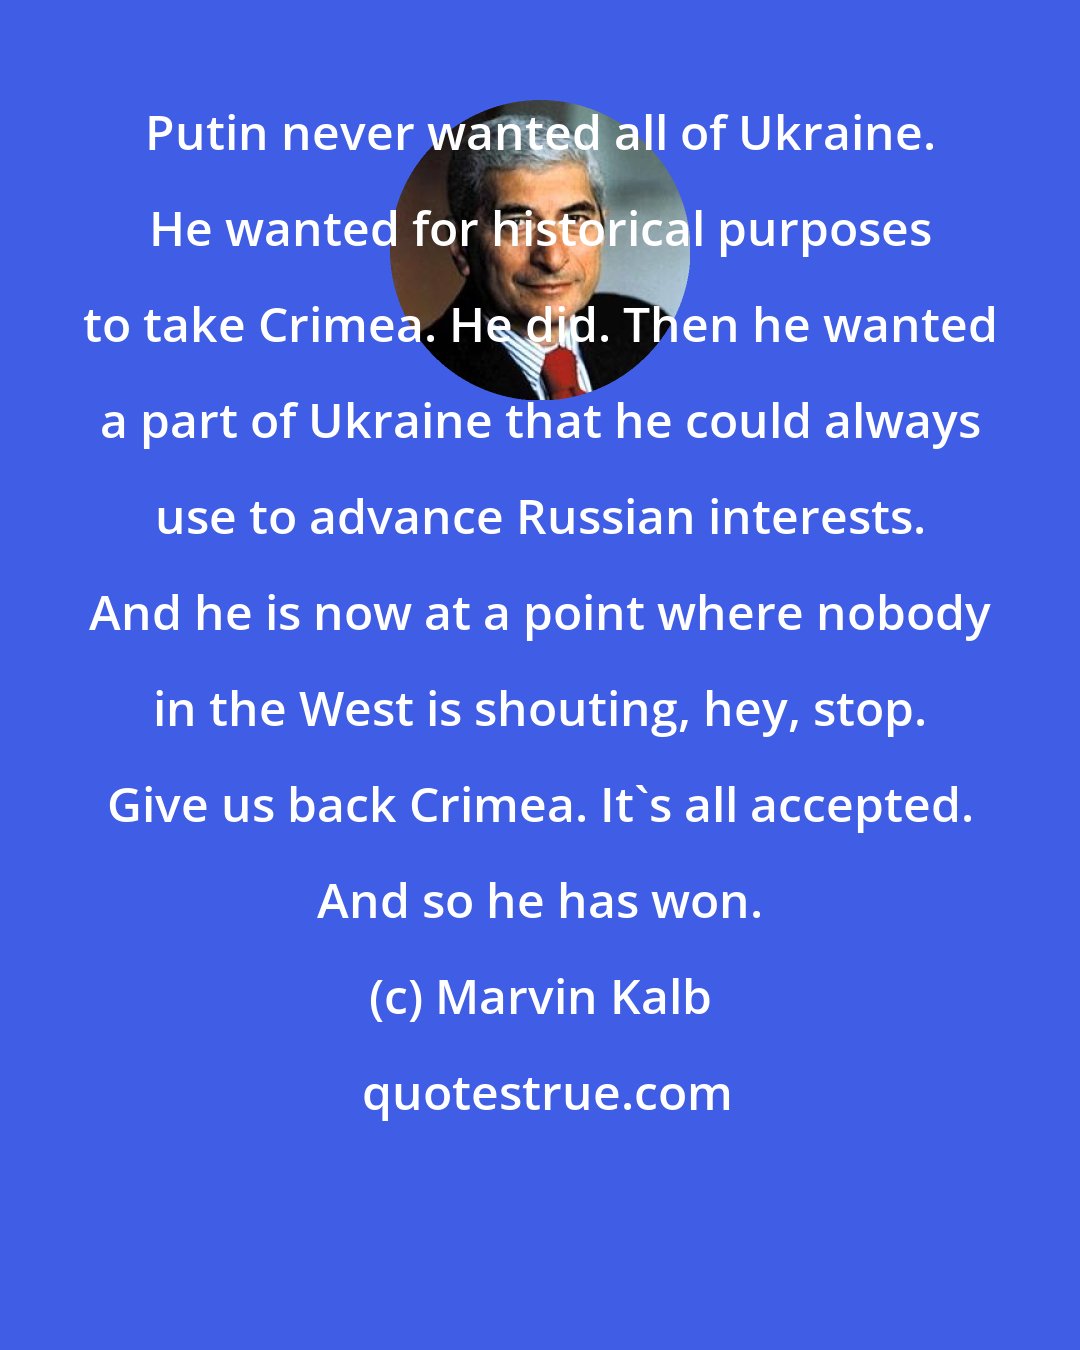 Marvin Kalb: Putin never wanted all of Ukraine. He wanted for historical purposes to take Crimea. He did. Then he wanted a part of Ukraine that he could always use to advance Russian interests. And he is now at a point where nobody in the West is shouting, hey, stop. Give us back Crimea. It's all accepted. And so he has won.